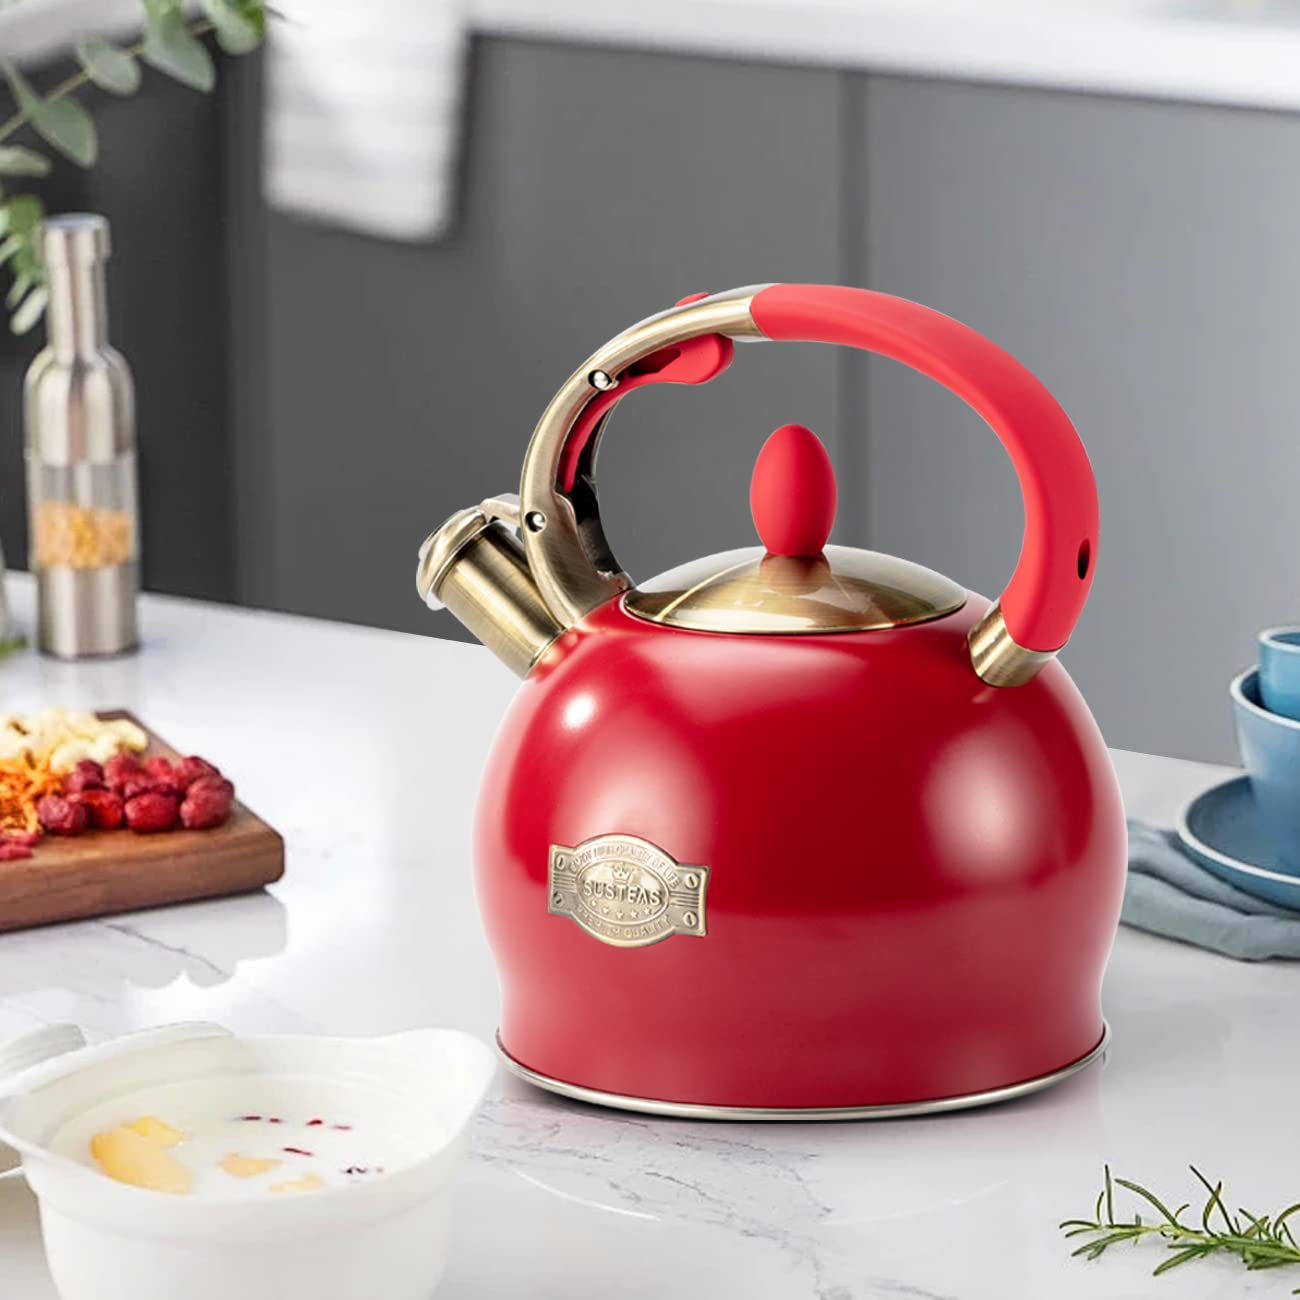 SUSTEAS Stove Top Whistling Tea Kettle - Food Grade Stainless Steel Teakettle Teapot with Cool Touch Ergonomic Handle,1 Free Silicone Pinch Mitt Included,2.64 Quart(RED)